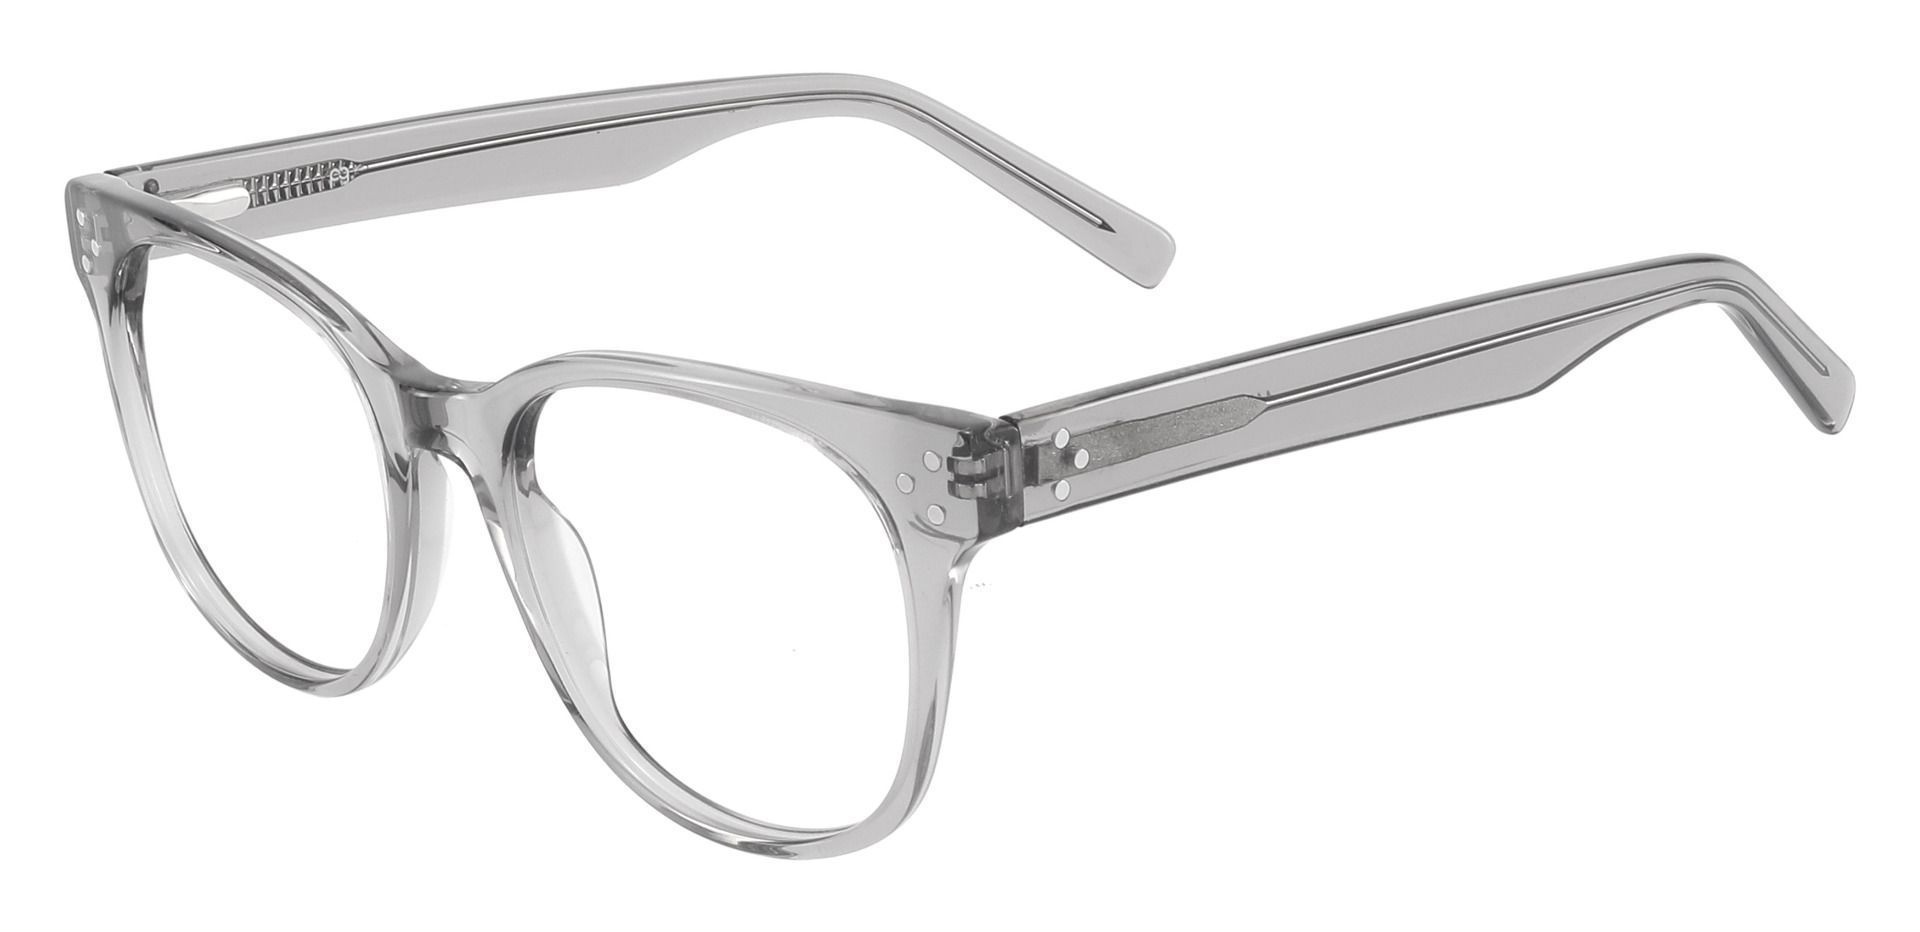 Orwell Oval Reading Glasses - Gray